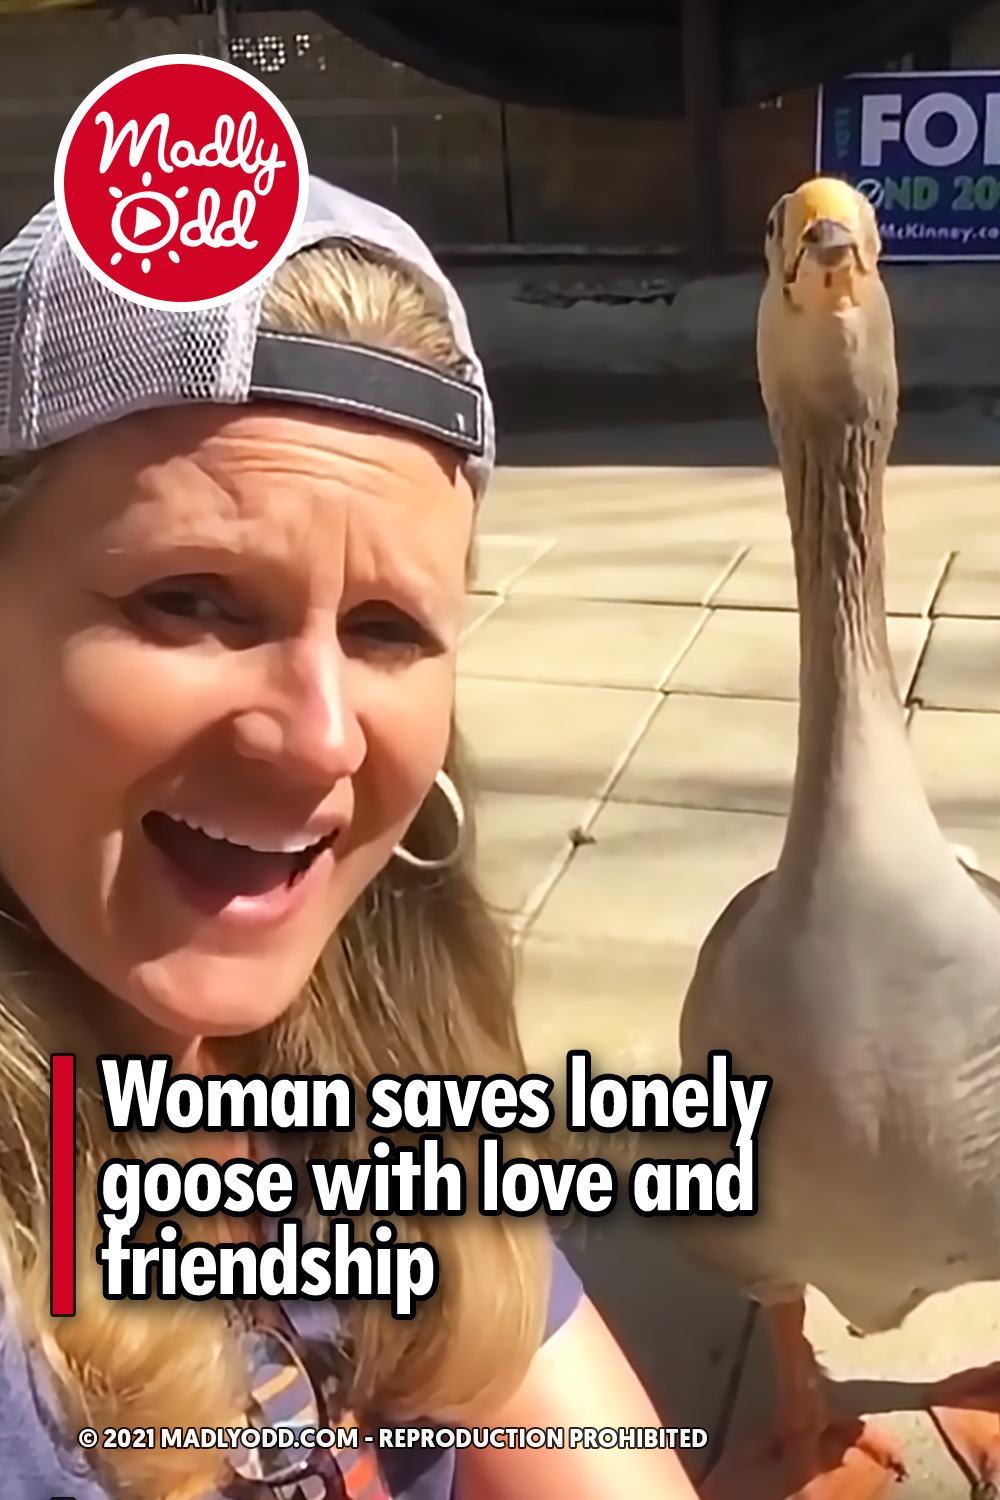 Woman saves lonely goose with love and friendship